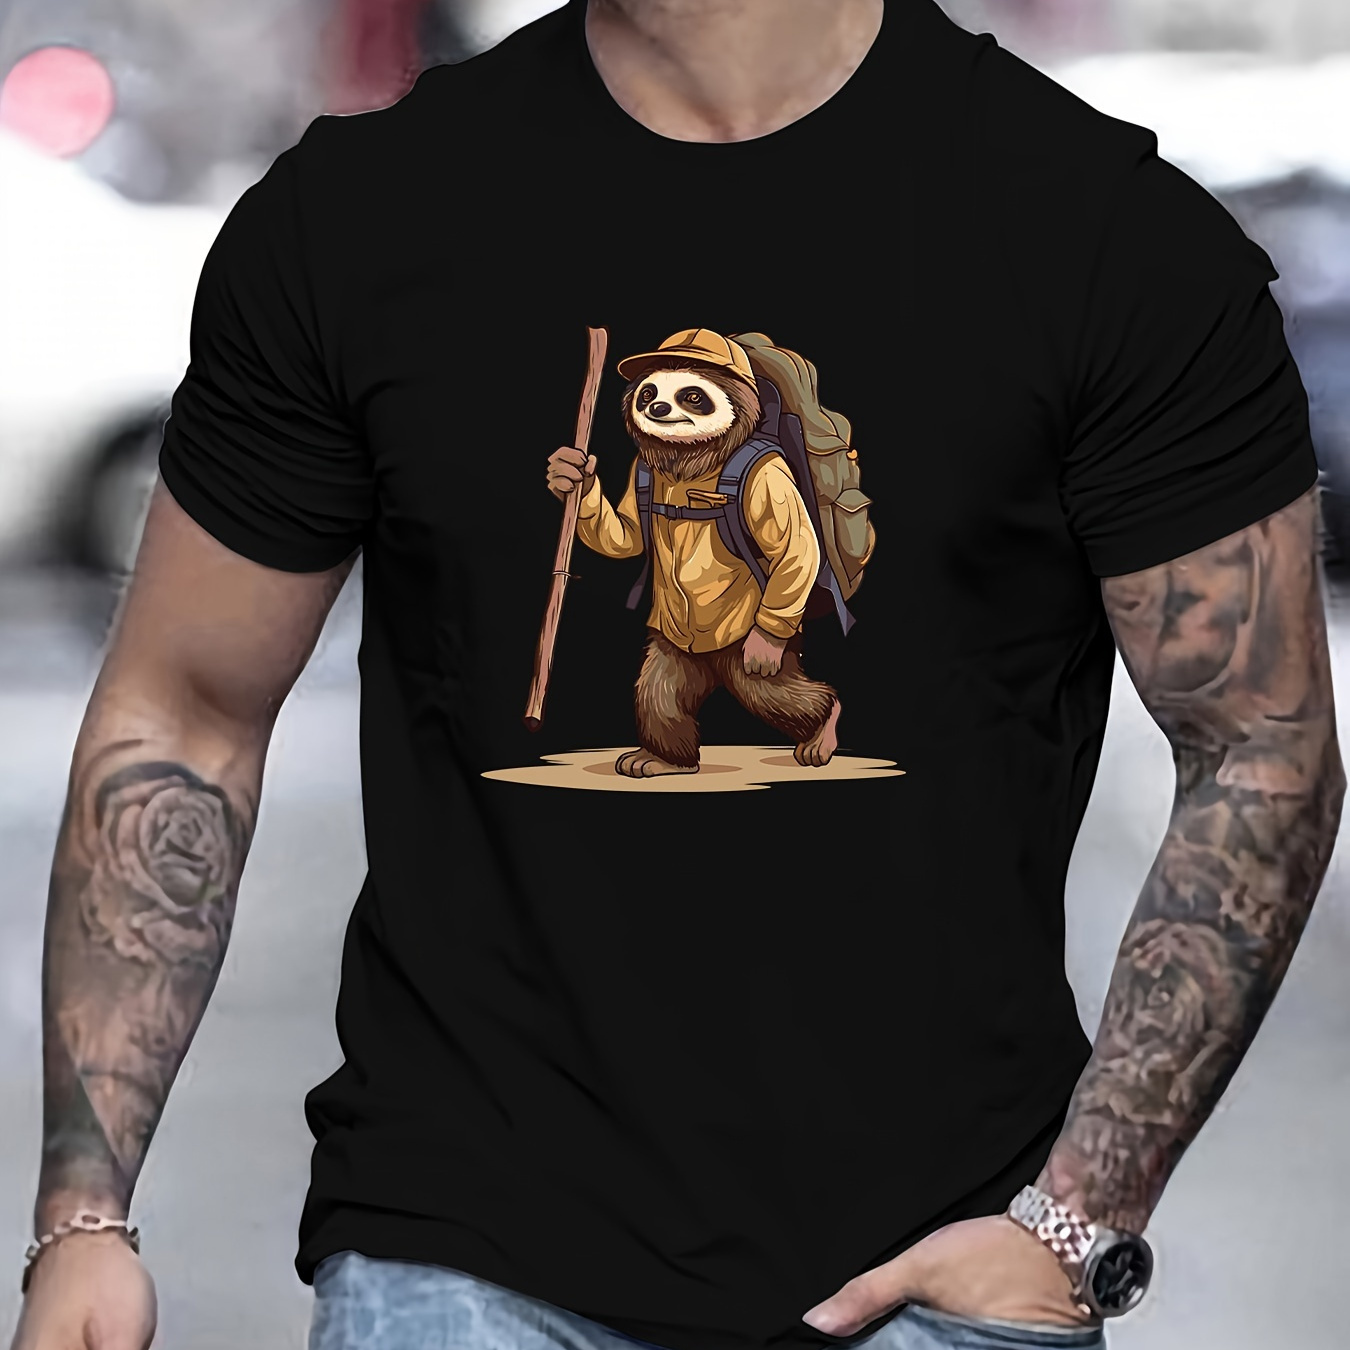 

Sloth Hiking Graphic Print Men's Creative Top, Casual Short Sleeve Crew Neck T-shirt, Men's Clothing For Summer Outdoor